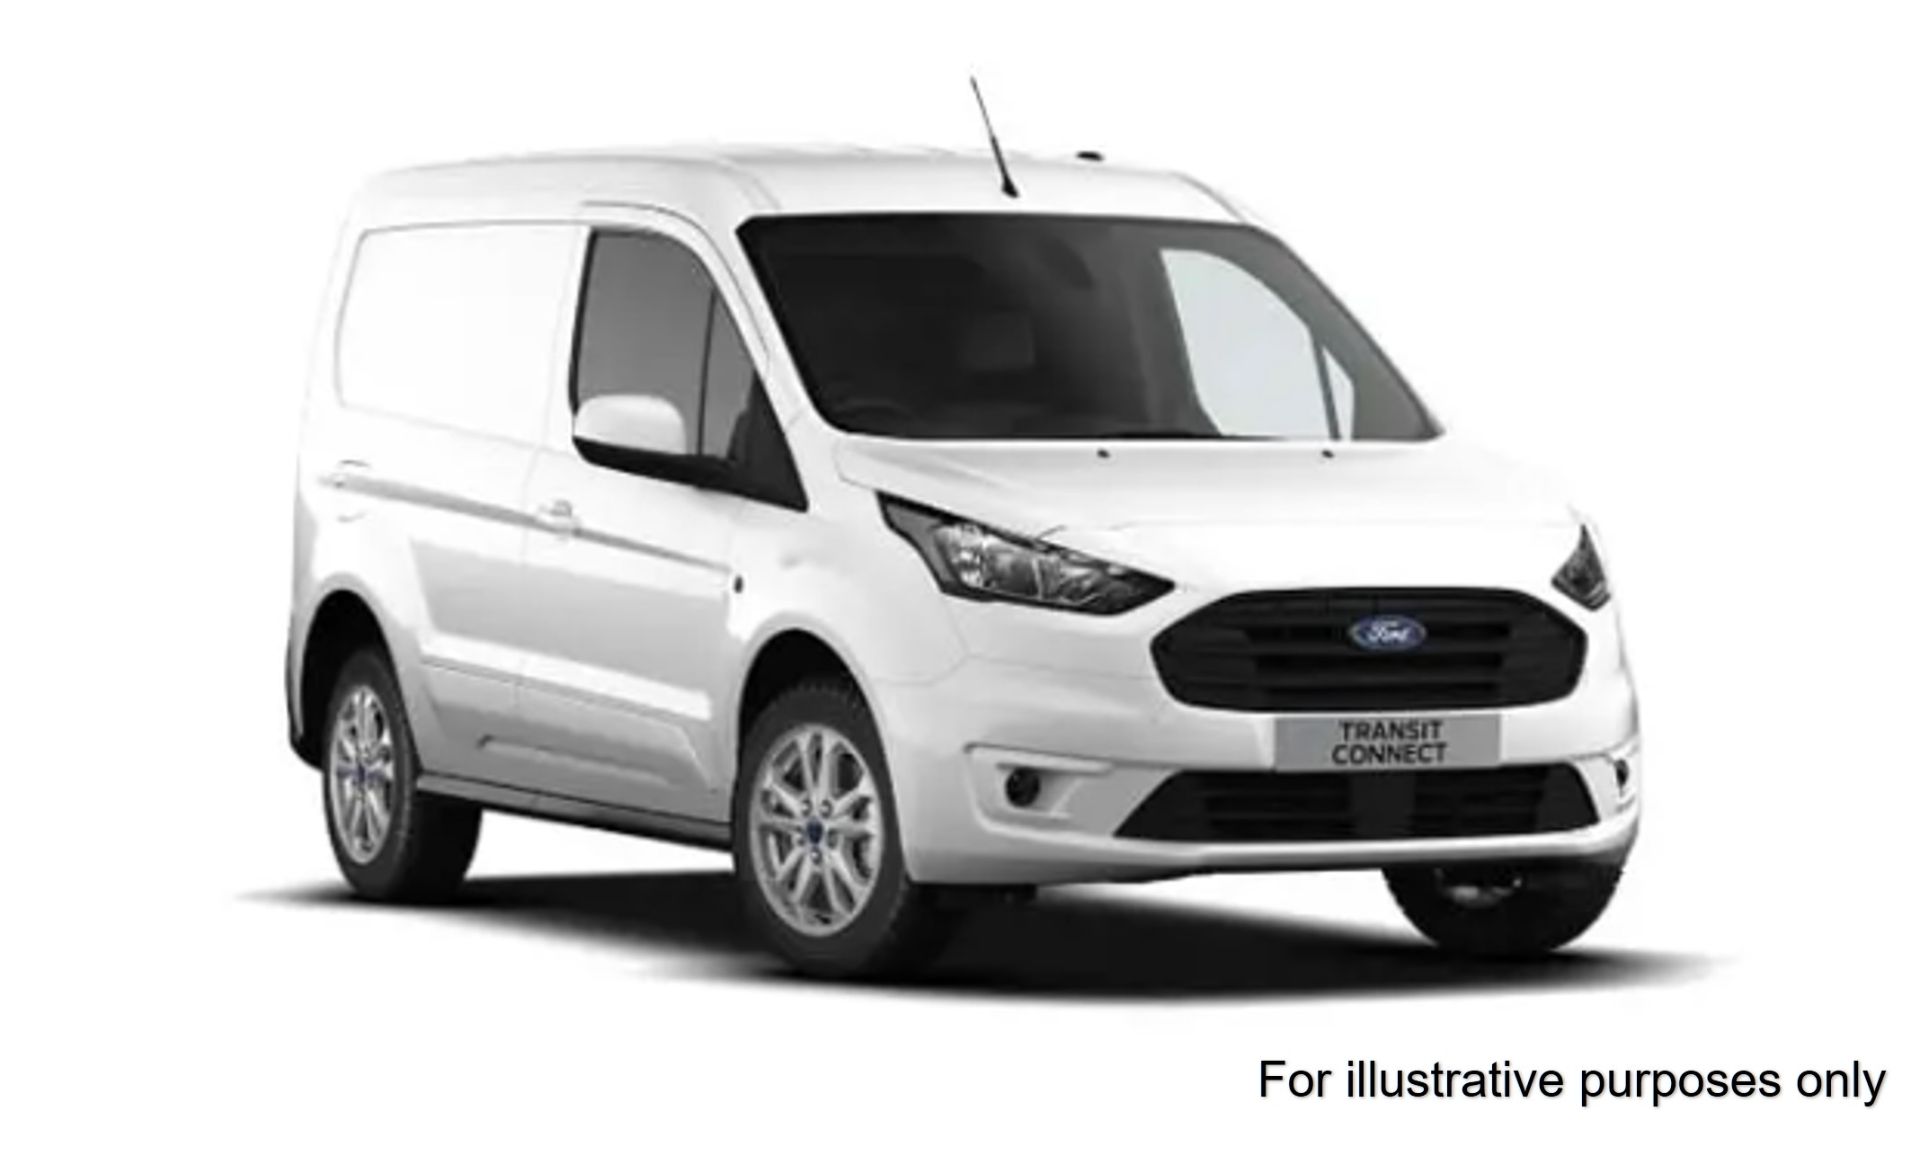 2018 Ford Transit Connect 1.5 Tdci 75Ps Van (FD18MHF)